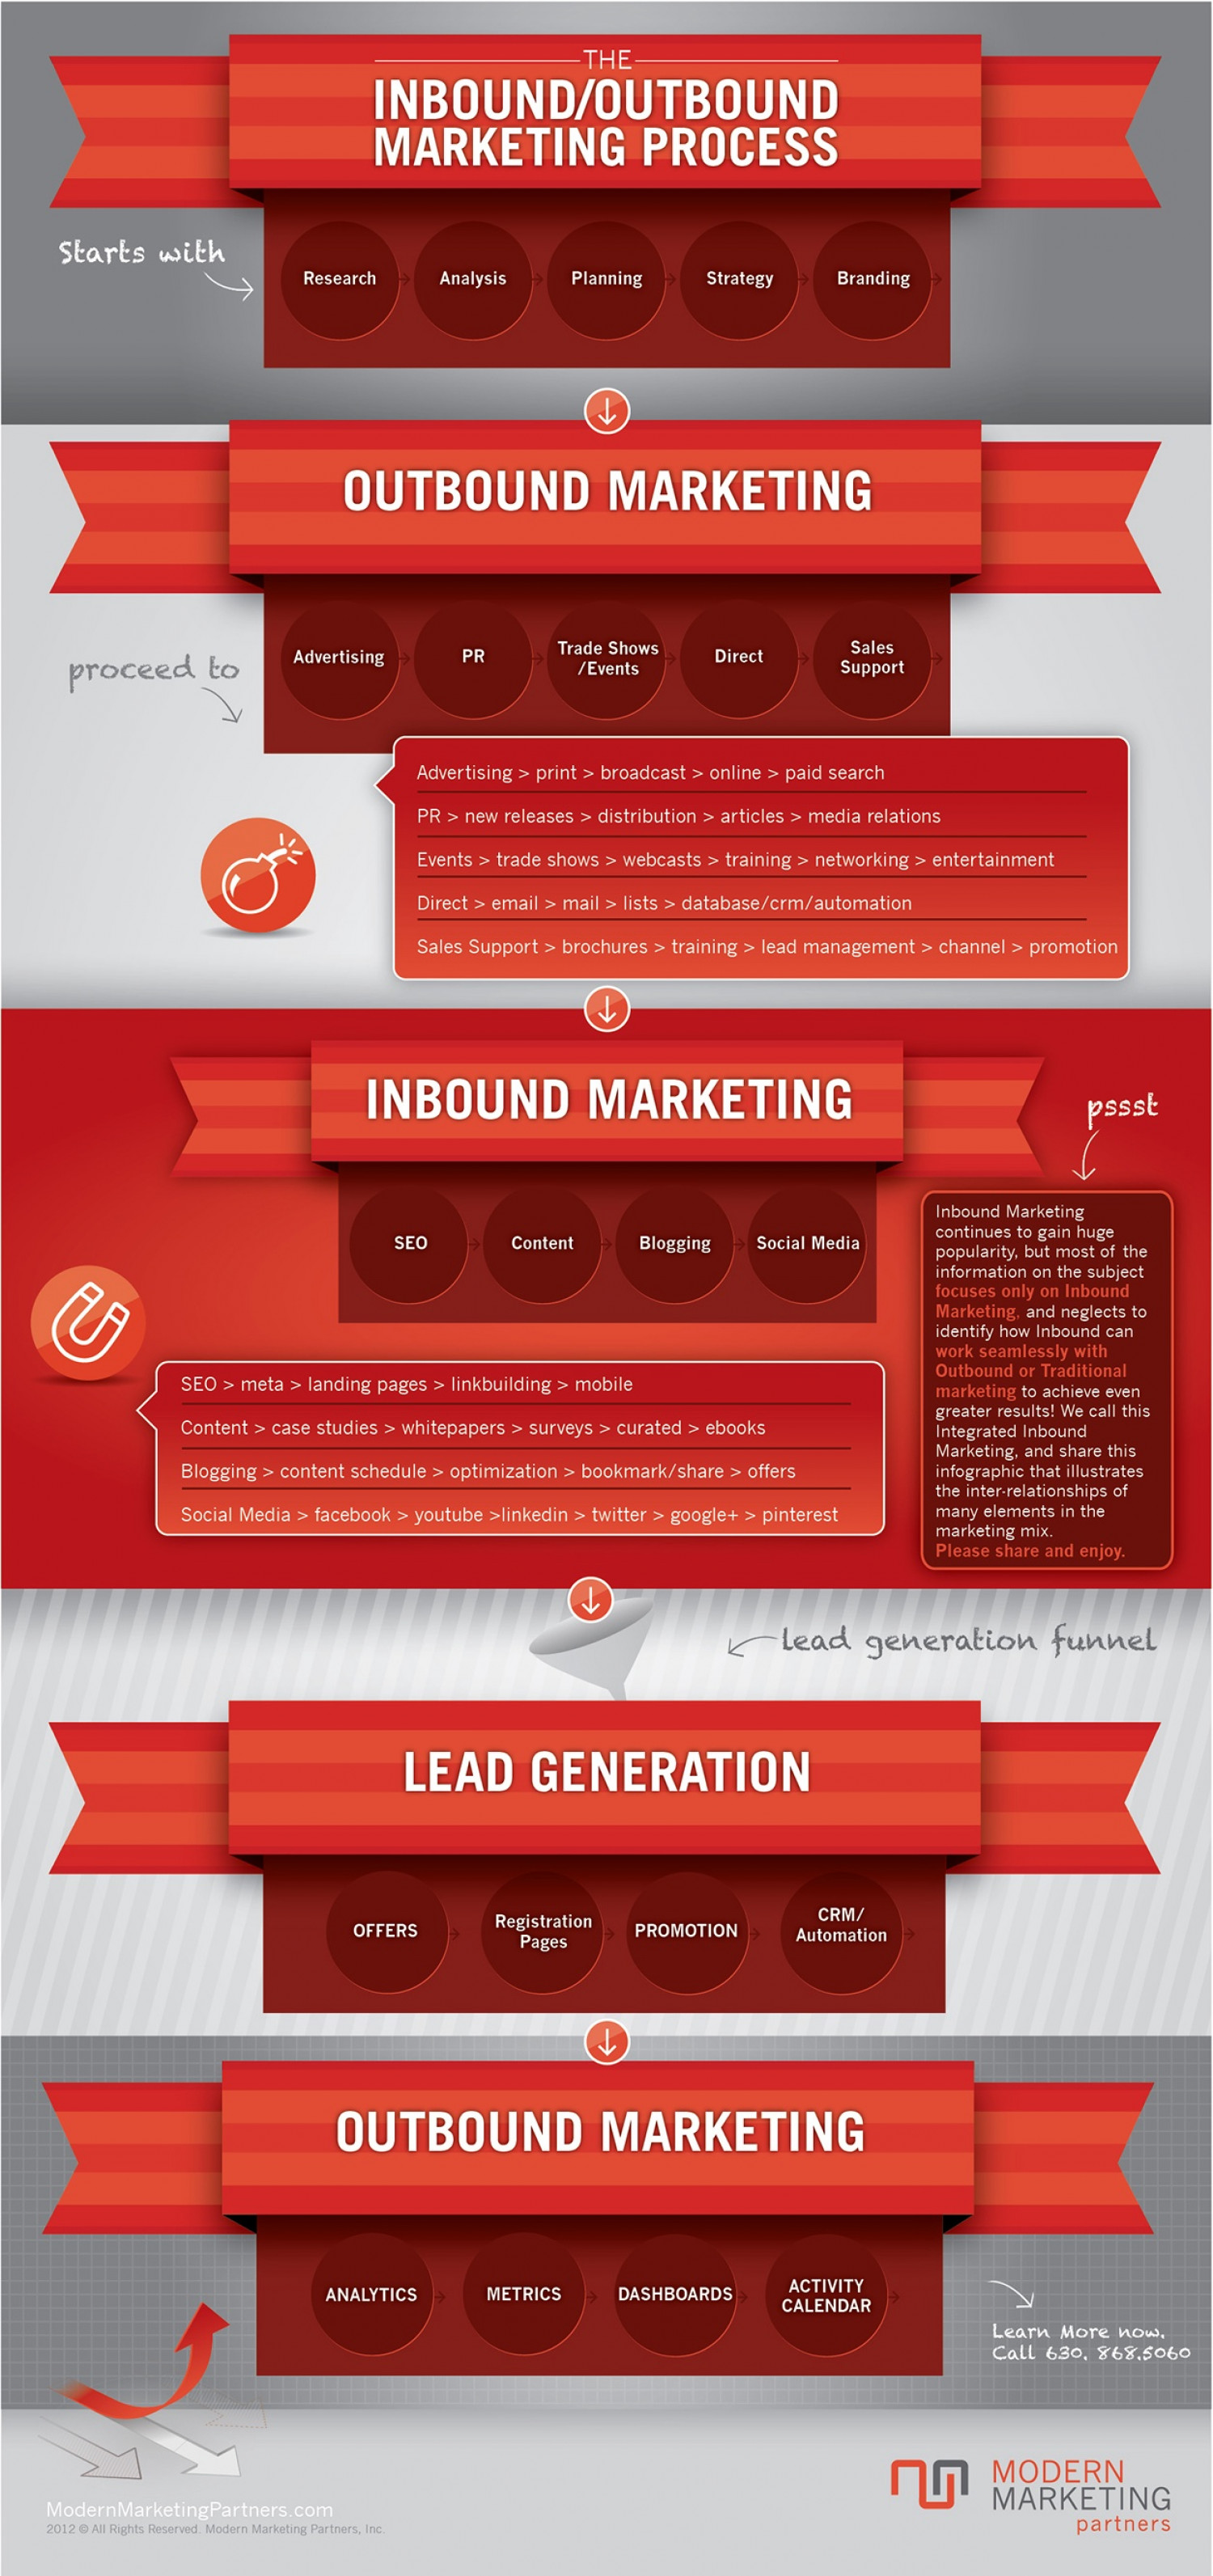 The Inbound/Outbound Marketing Process Infographic